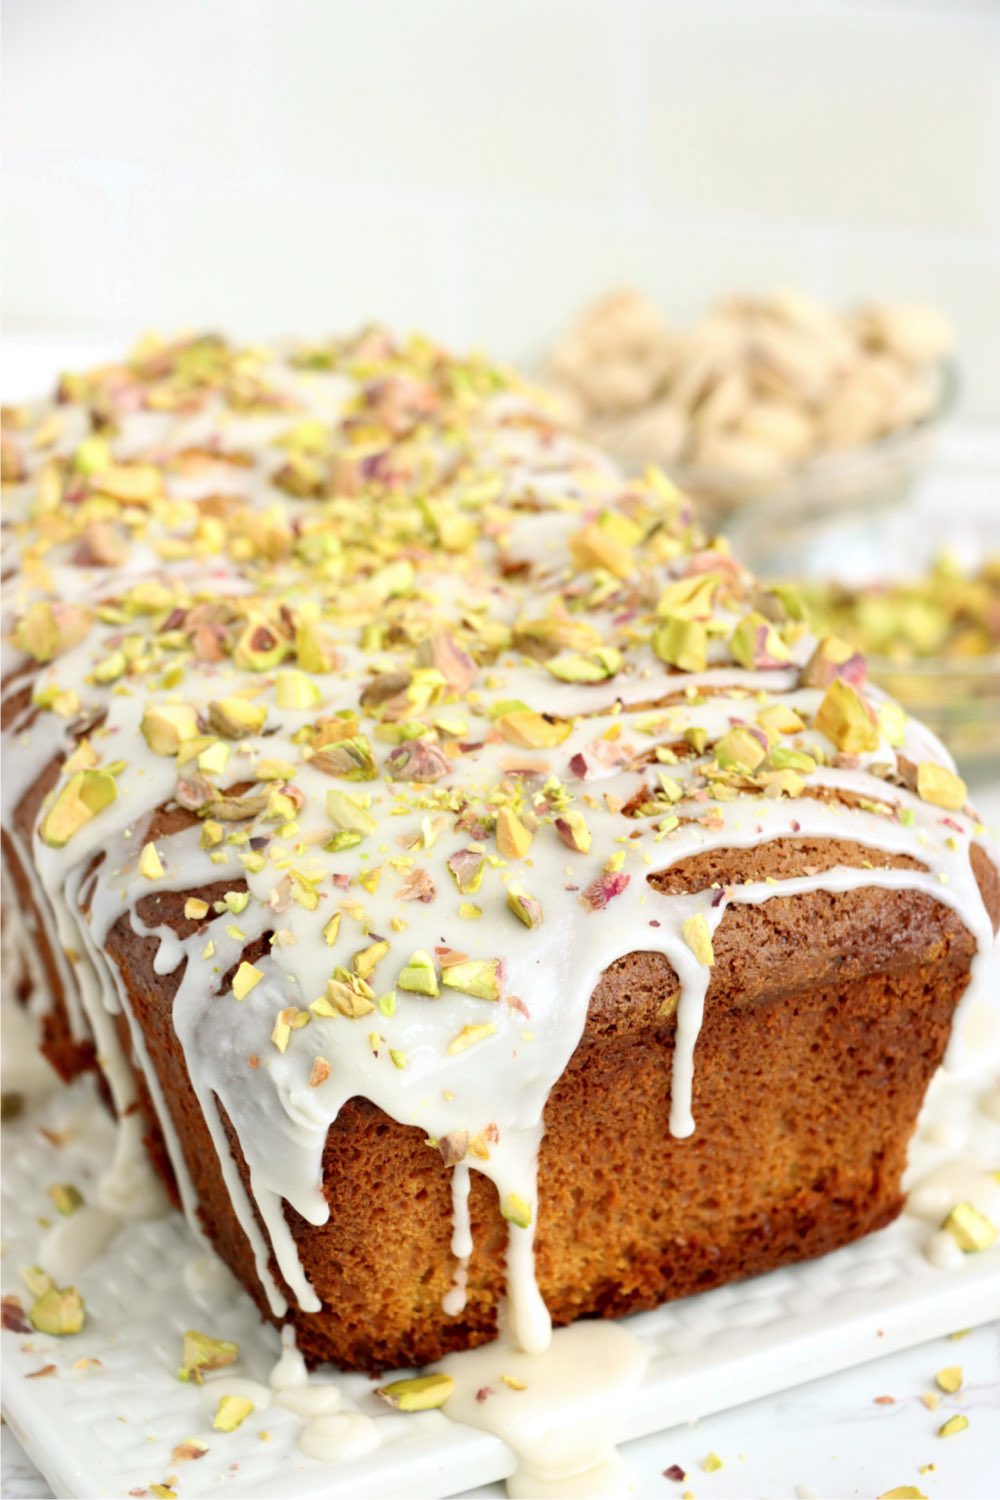 Pistachio loaf with icing drizzled on top